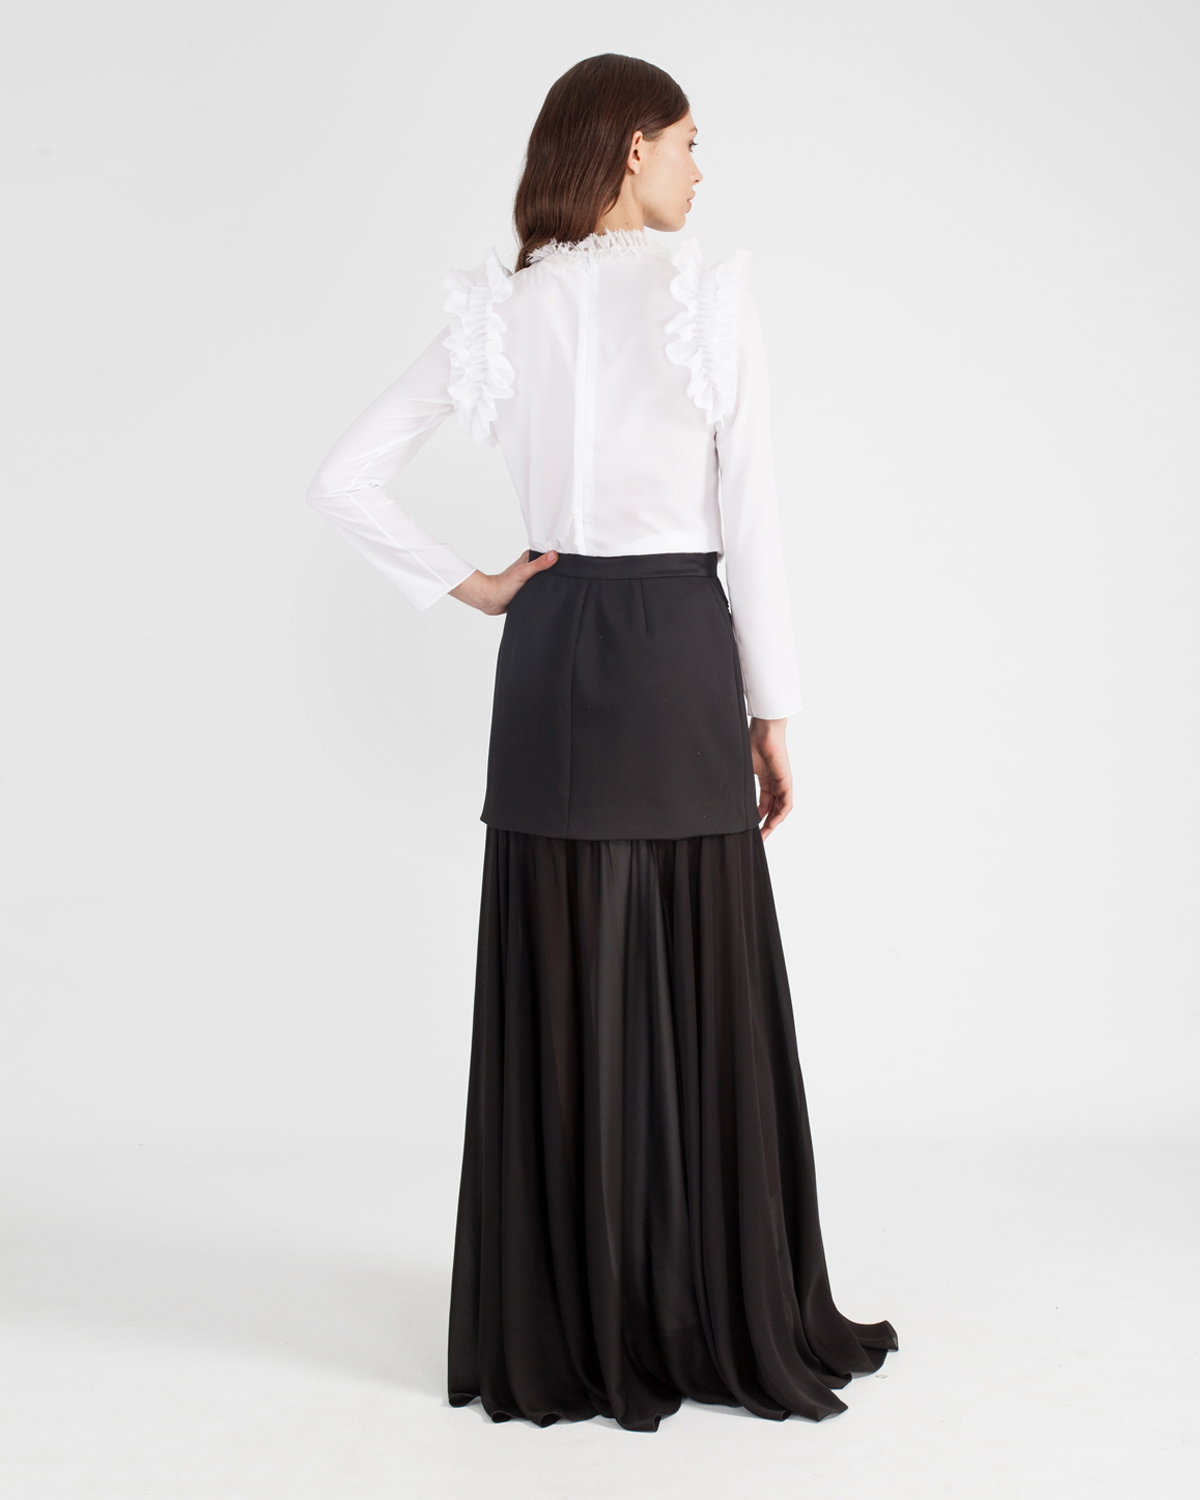 Ruched white blouse | Sale, -50% | Genny